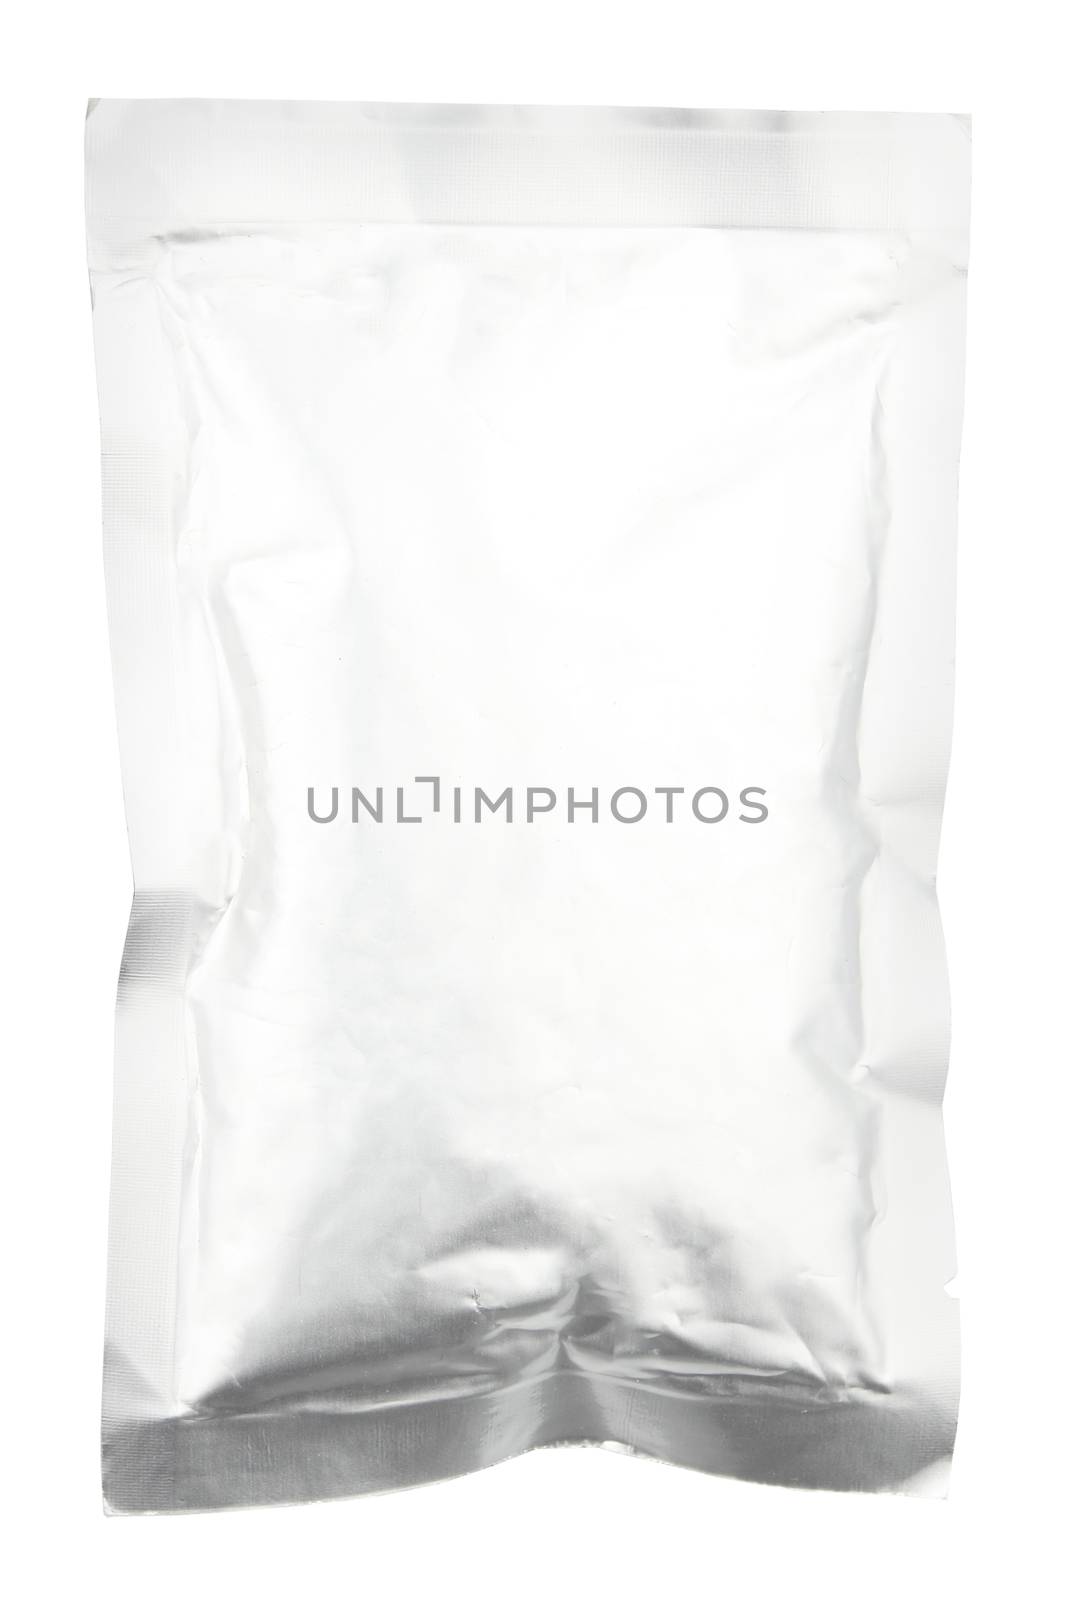 Aluminum foil bag on white background by wyoosumran